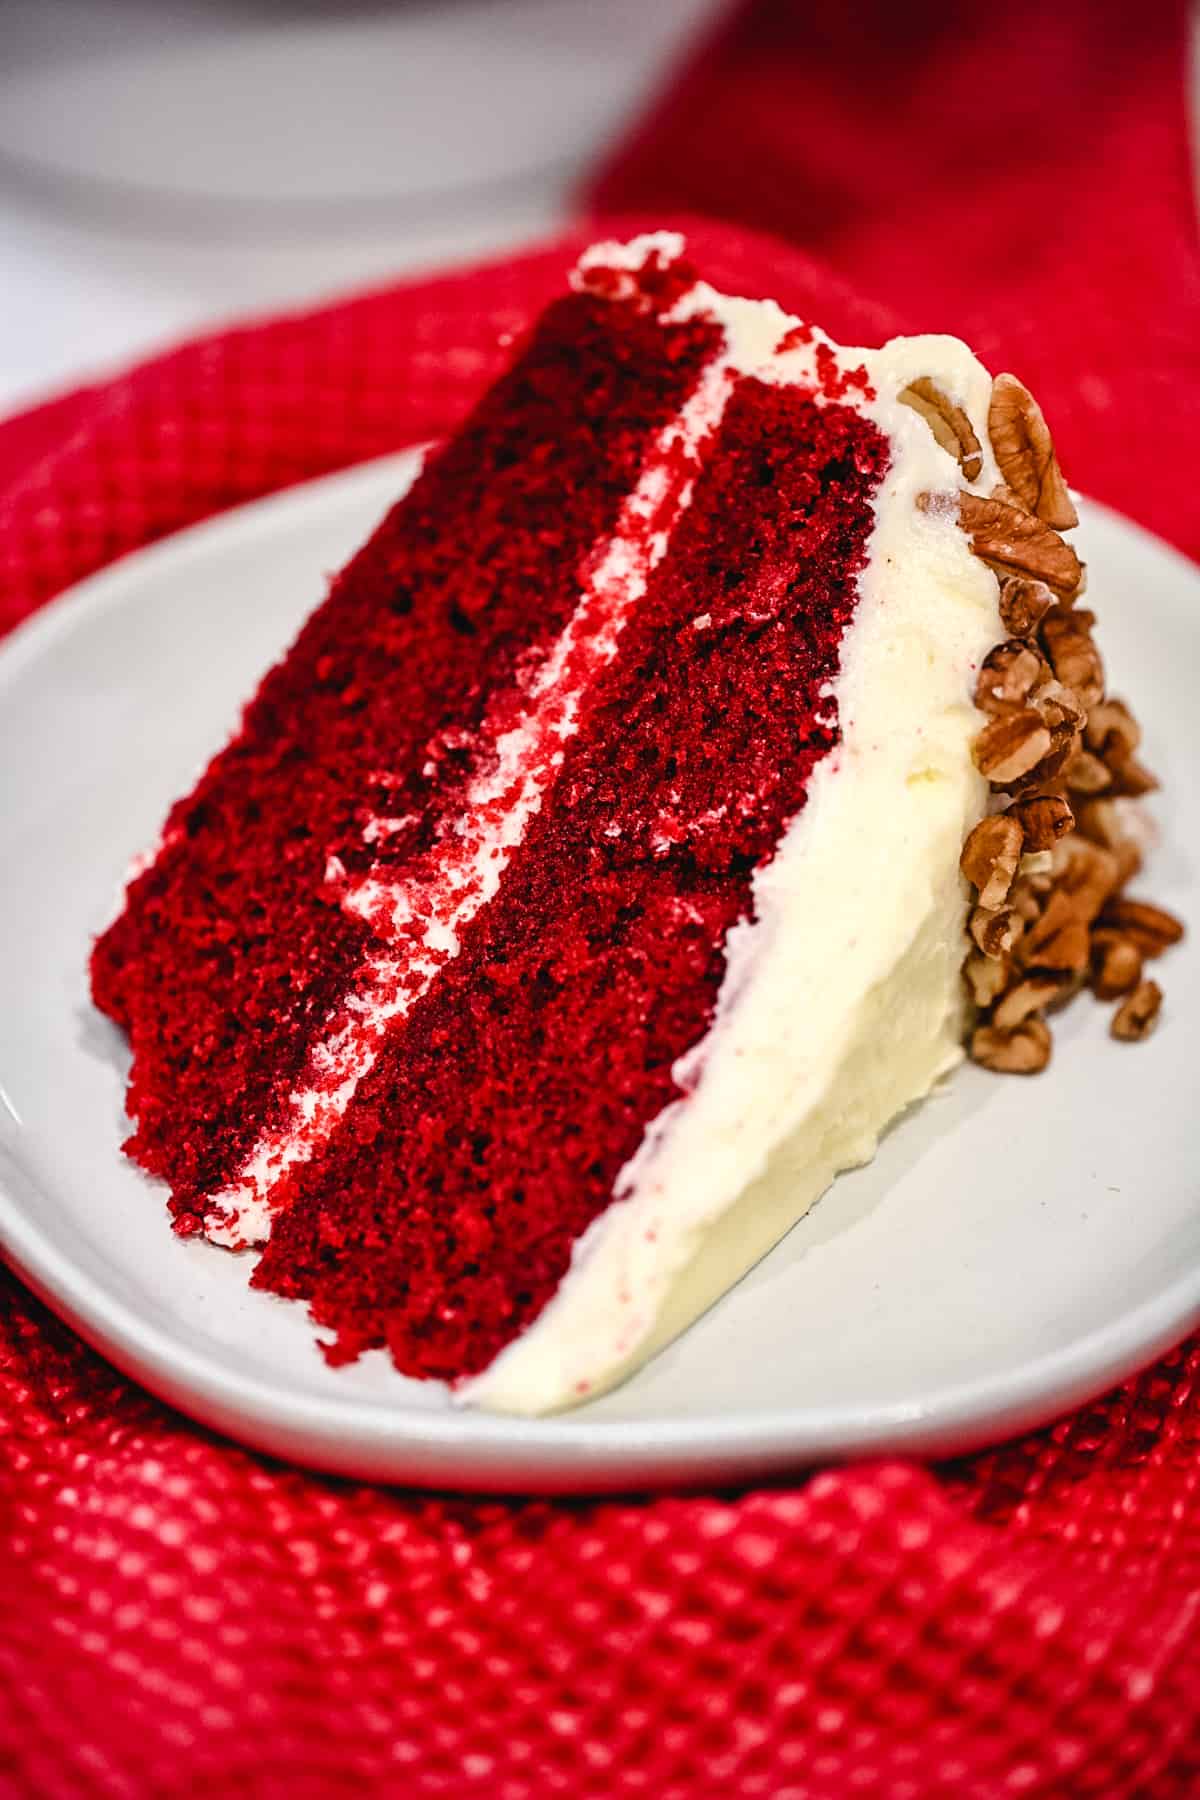 Slice of red velvet cake with cream cheese icing and pecans set on a red cloth.